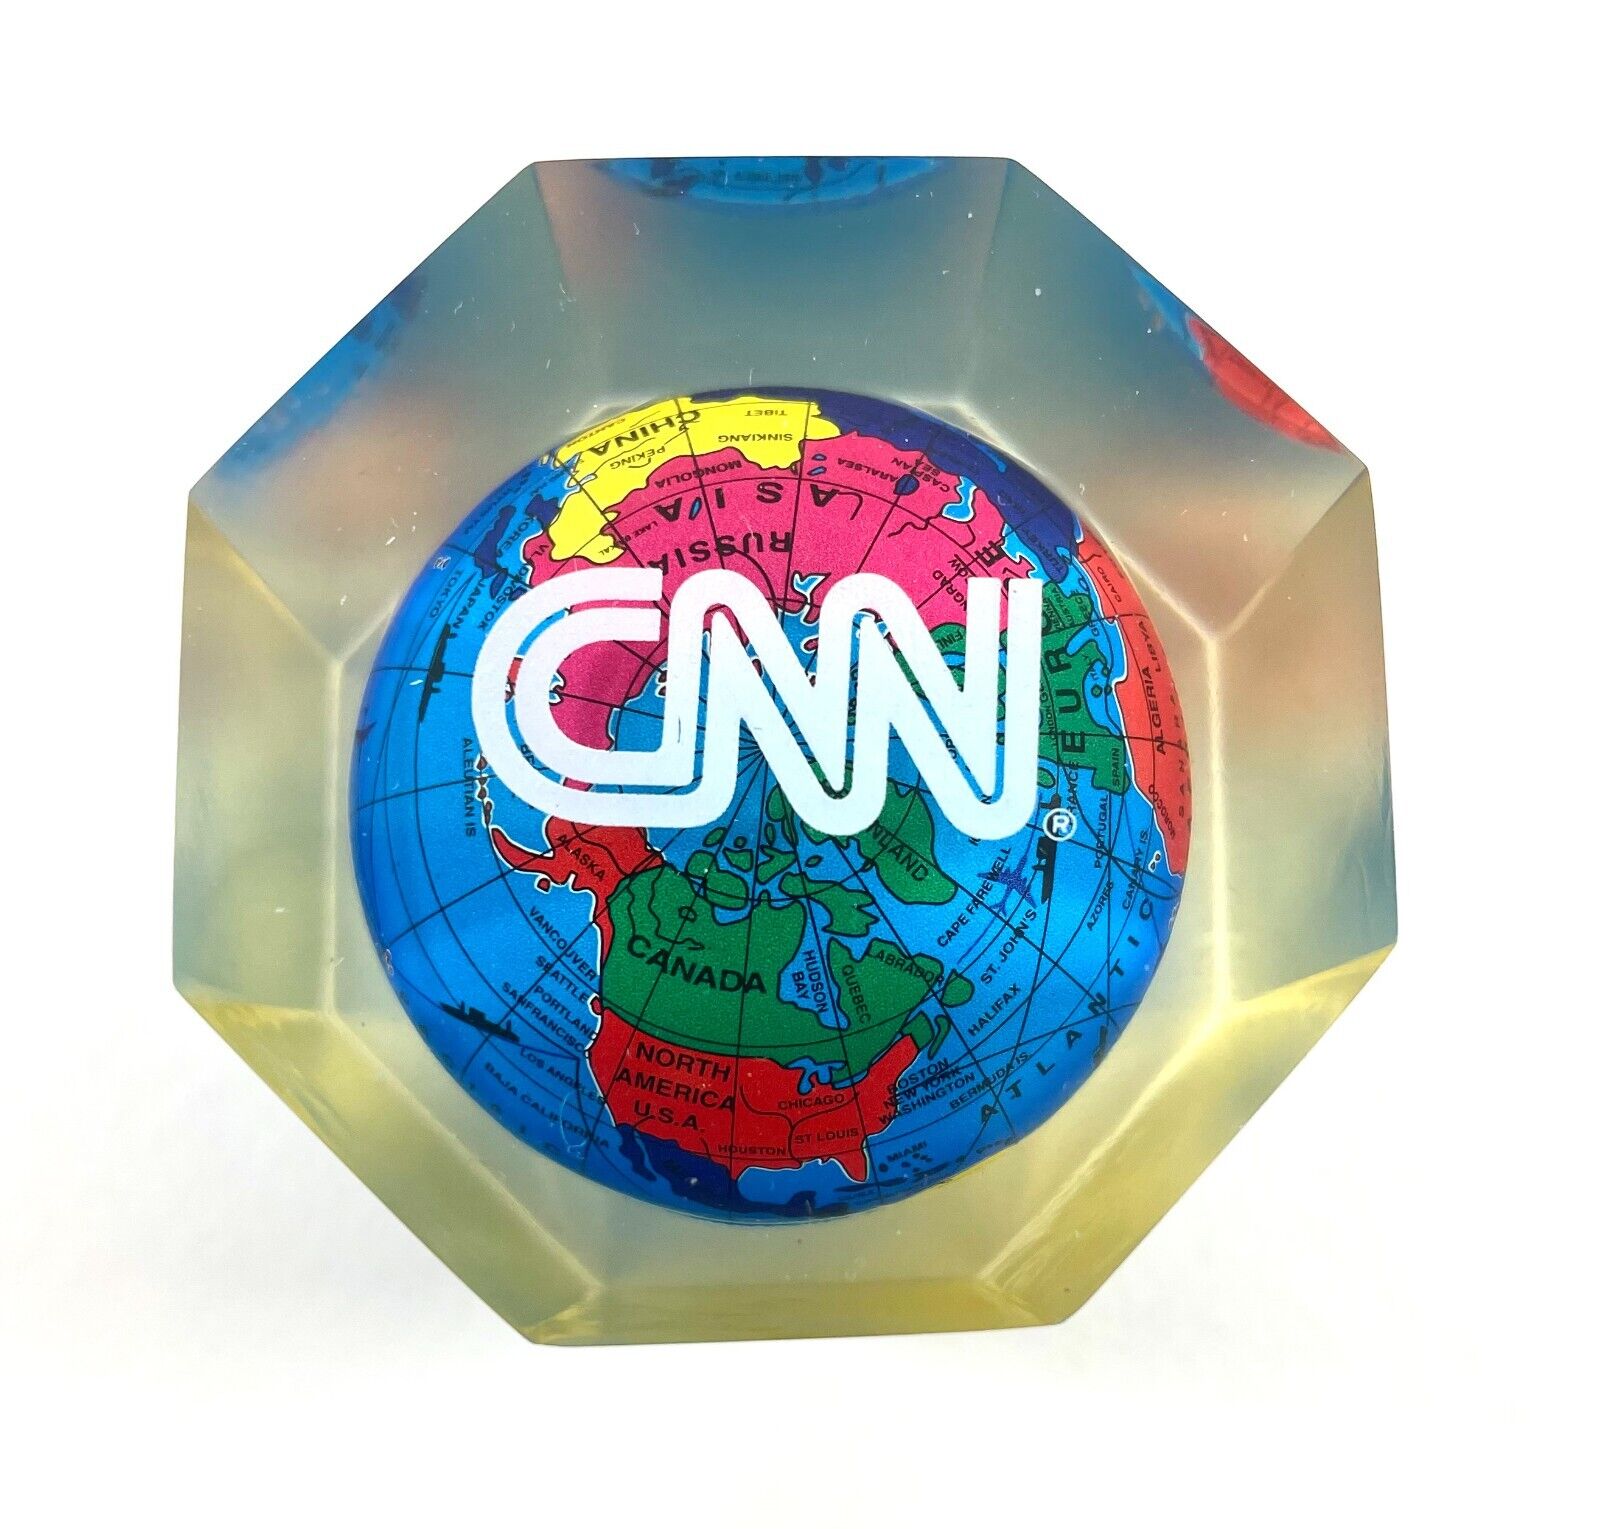 CNN Acrylic 8-sided World Globe Lucite Paperweight